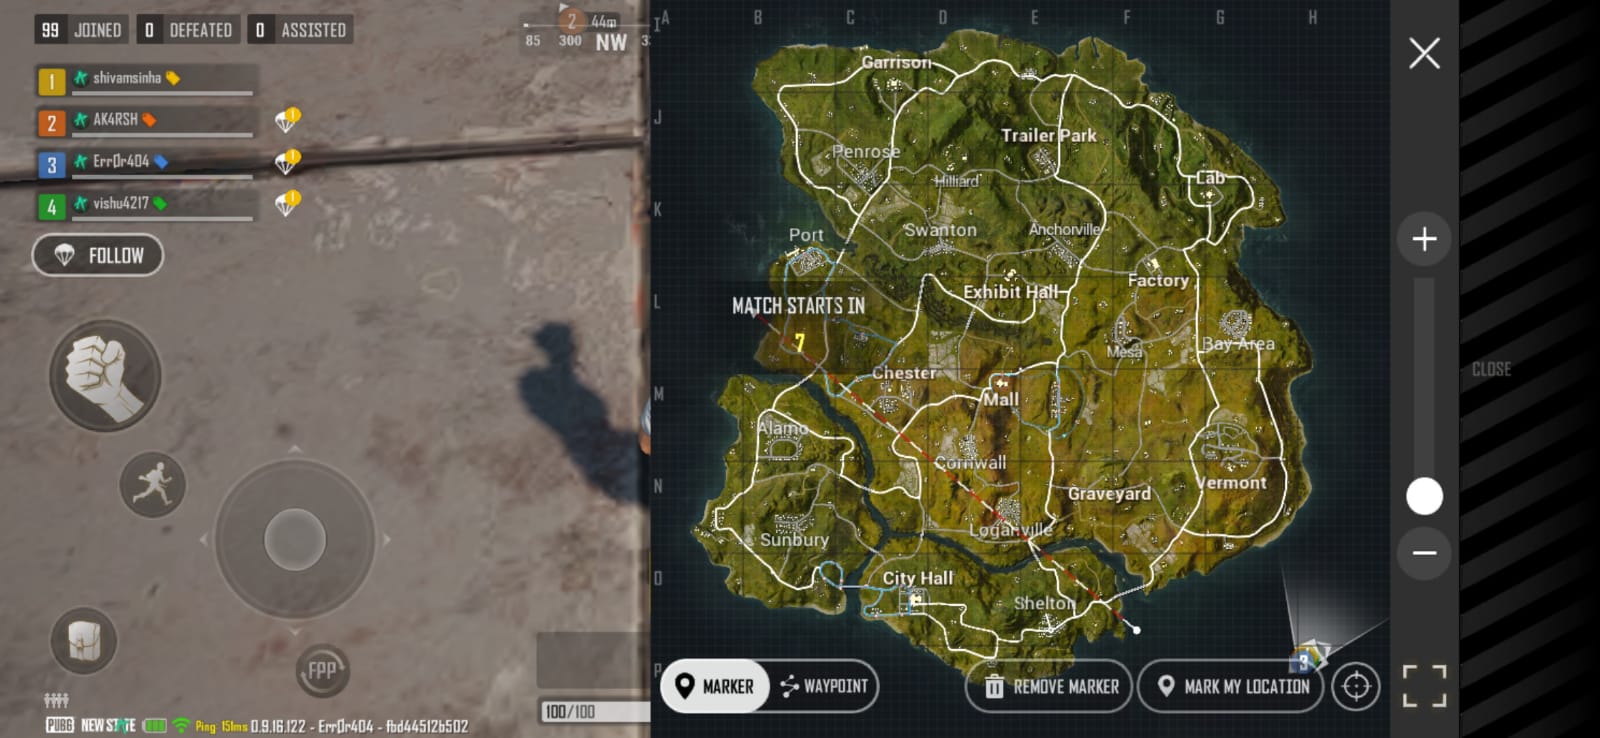 The new maps in Play Pubg new state